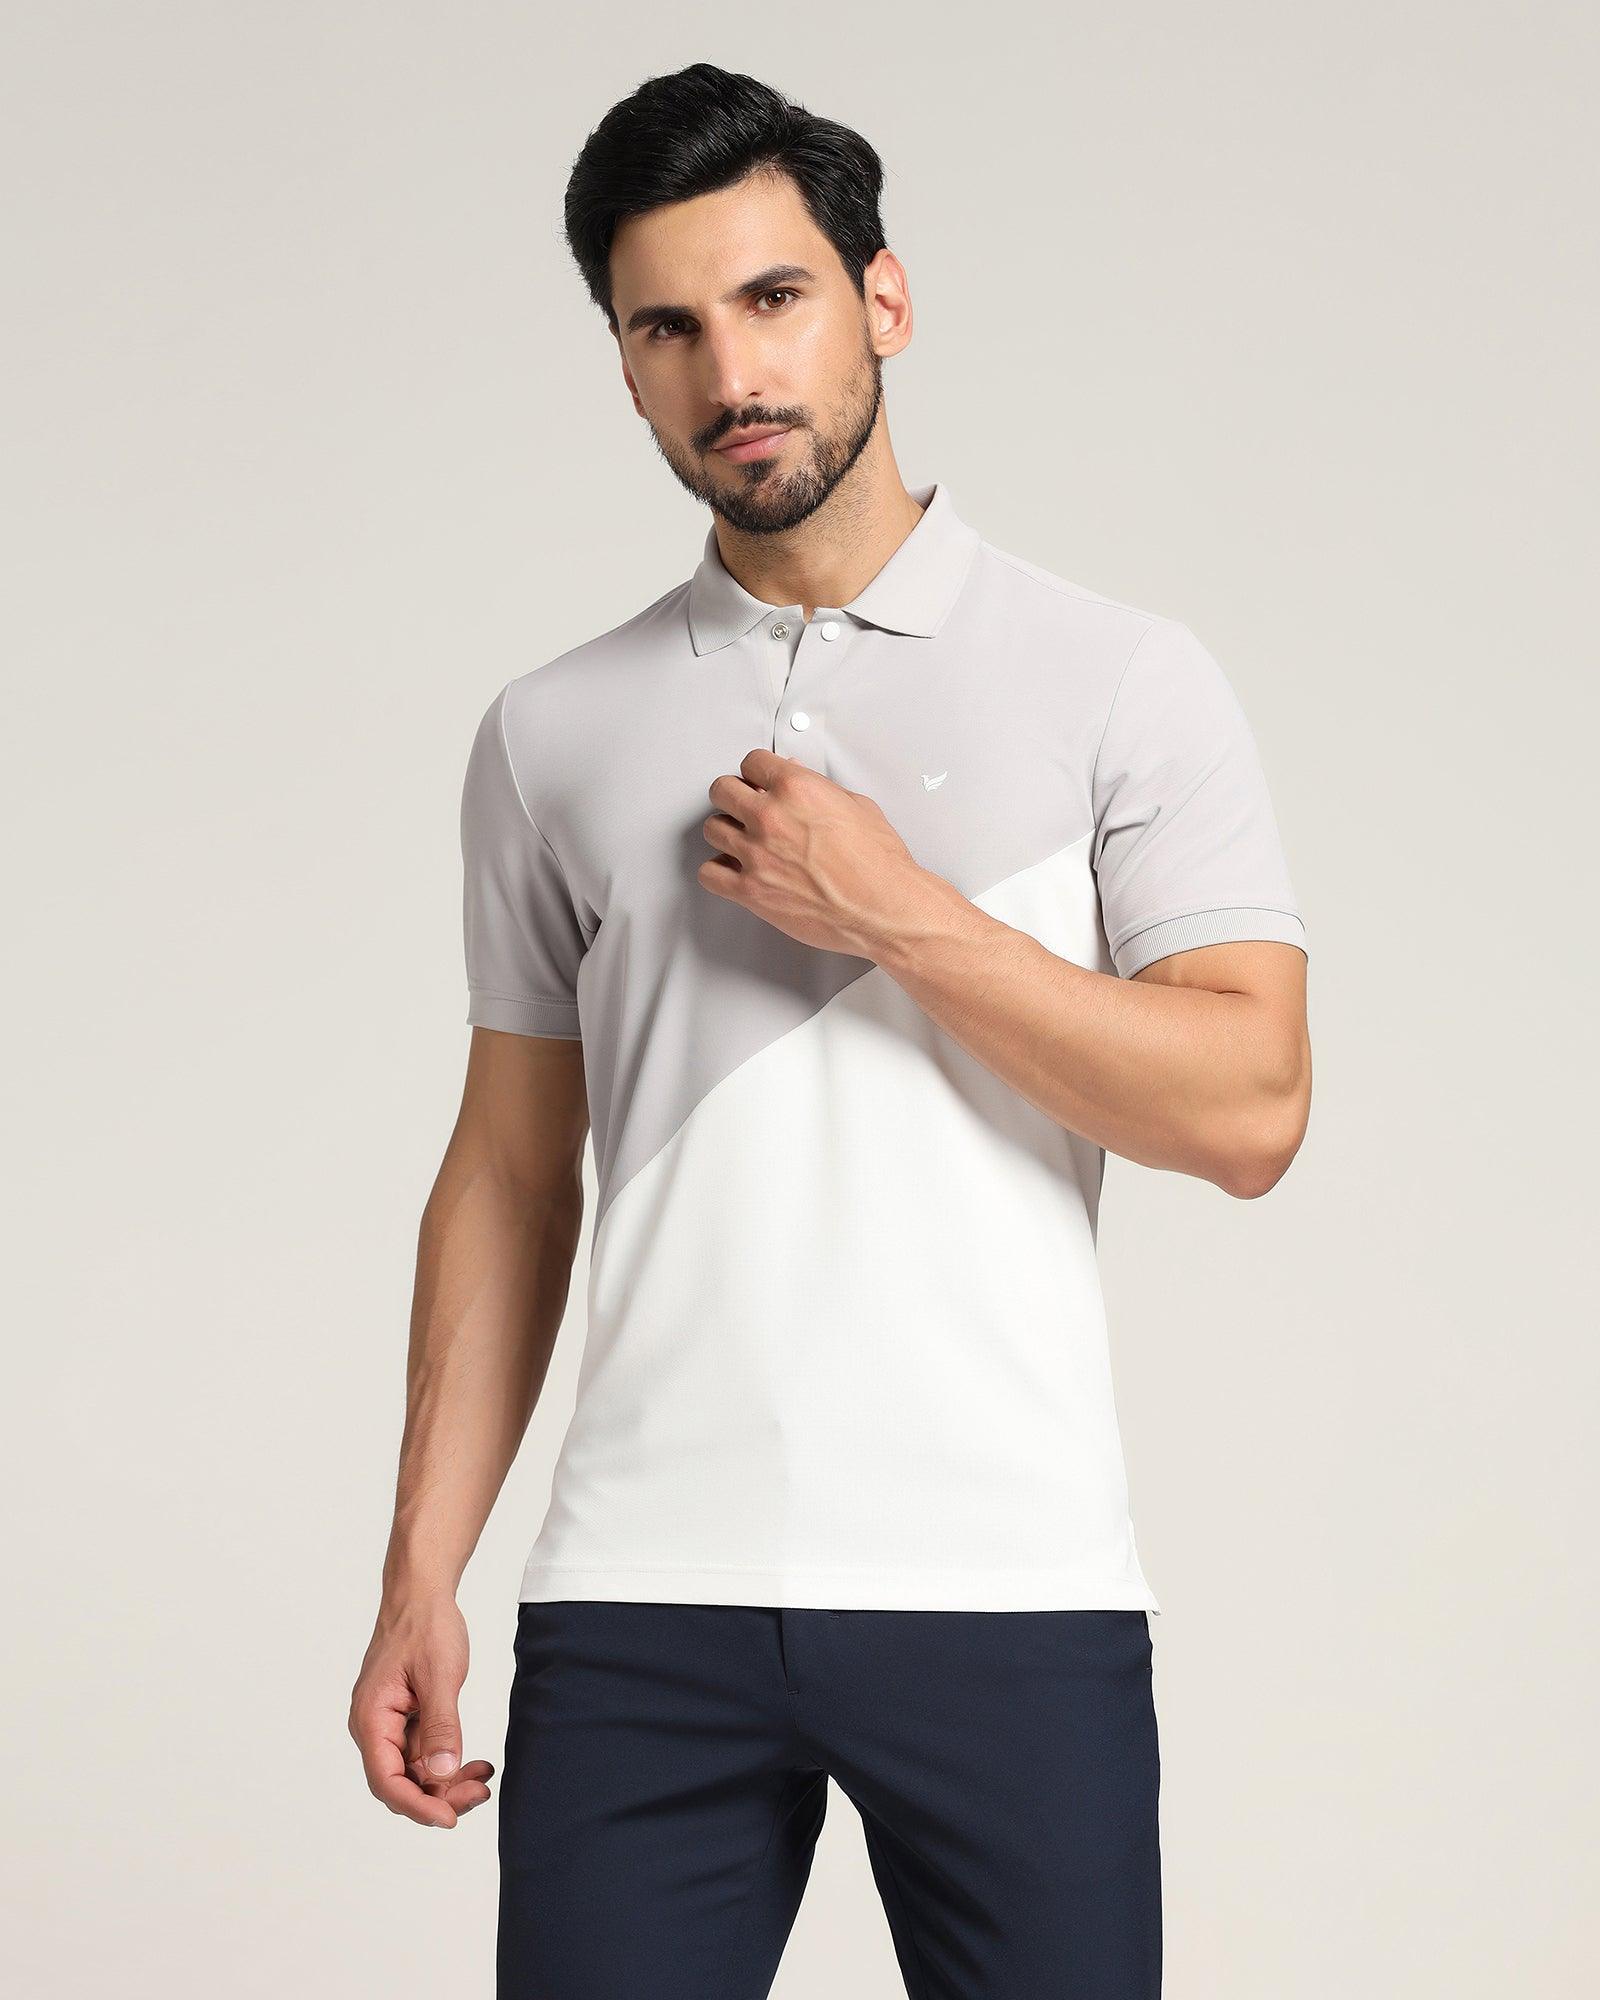 TechPro Polo Grey Solid T-Shirt - Golf